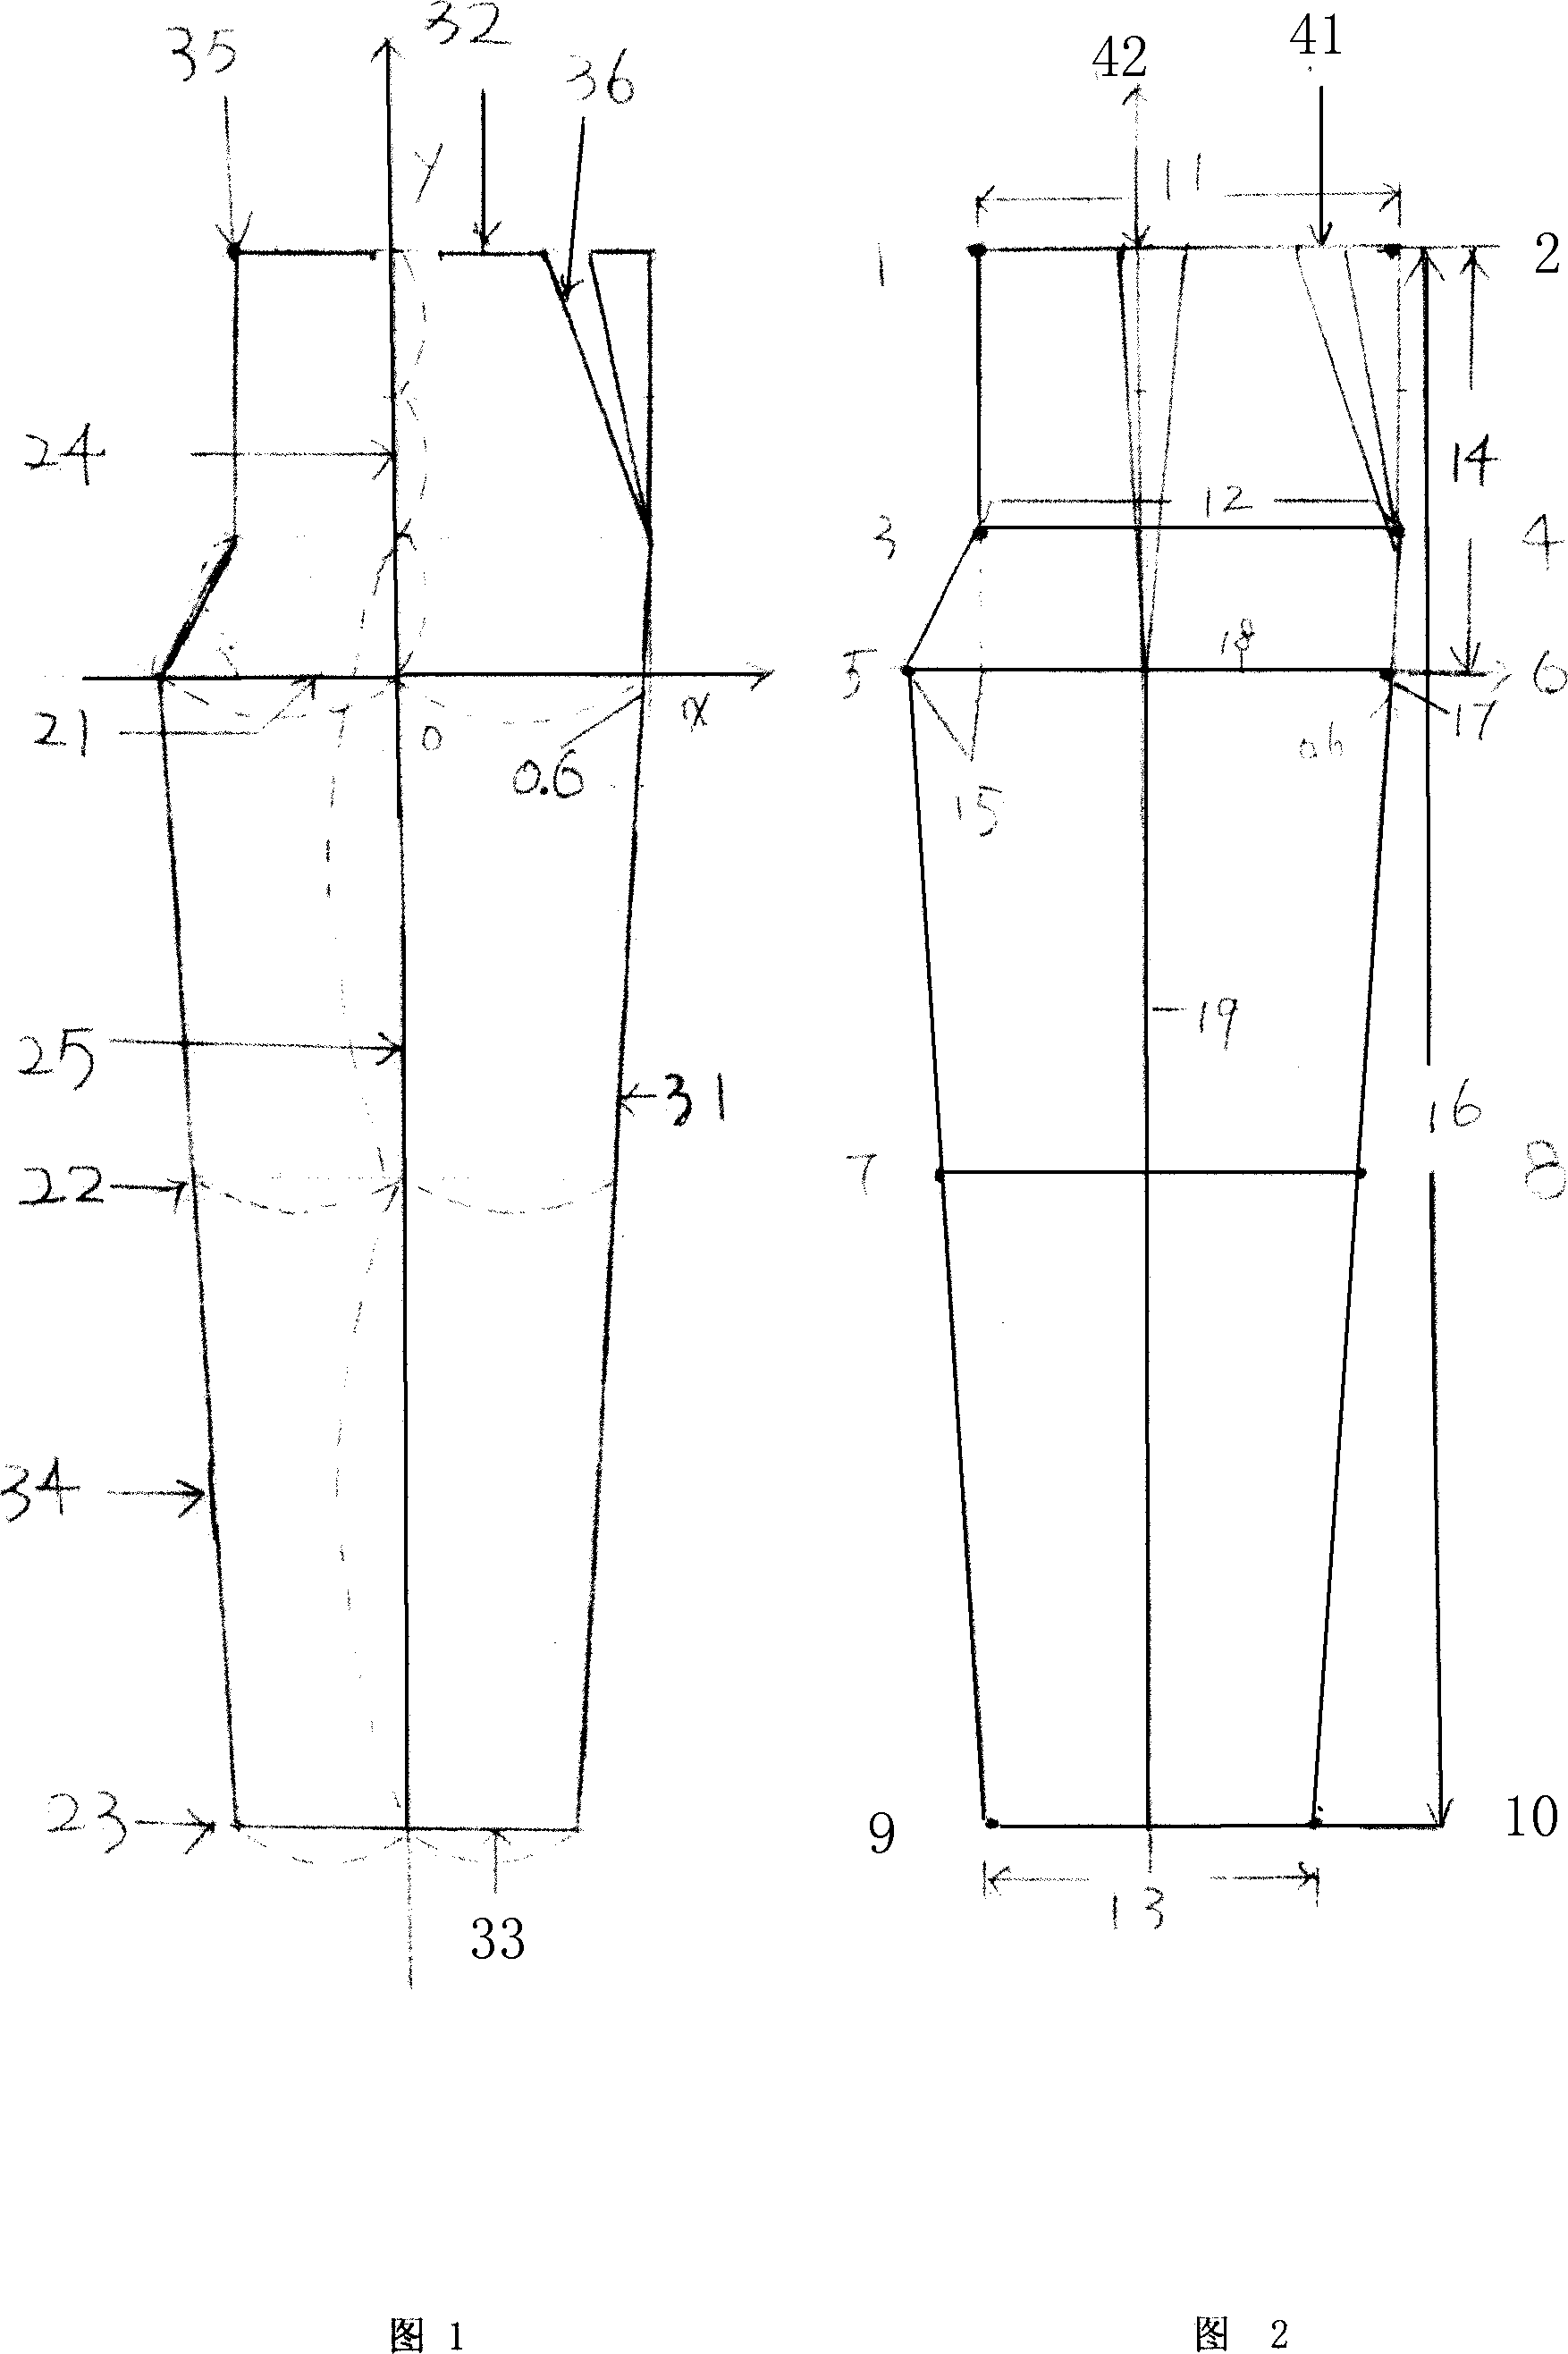 A method for designing and mapping the clothing pattern sheet according to plane structure of a structure plane graph